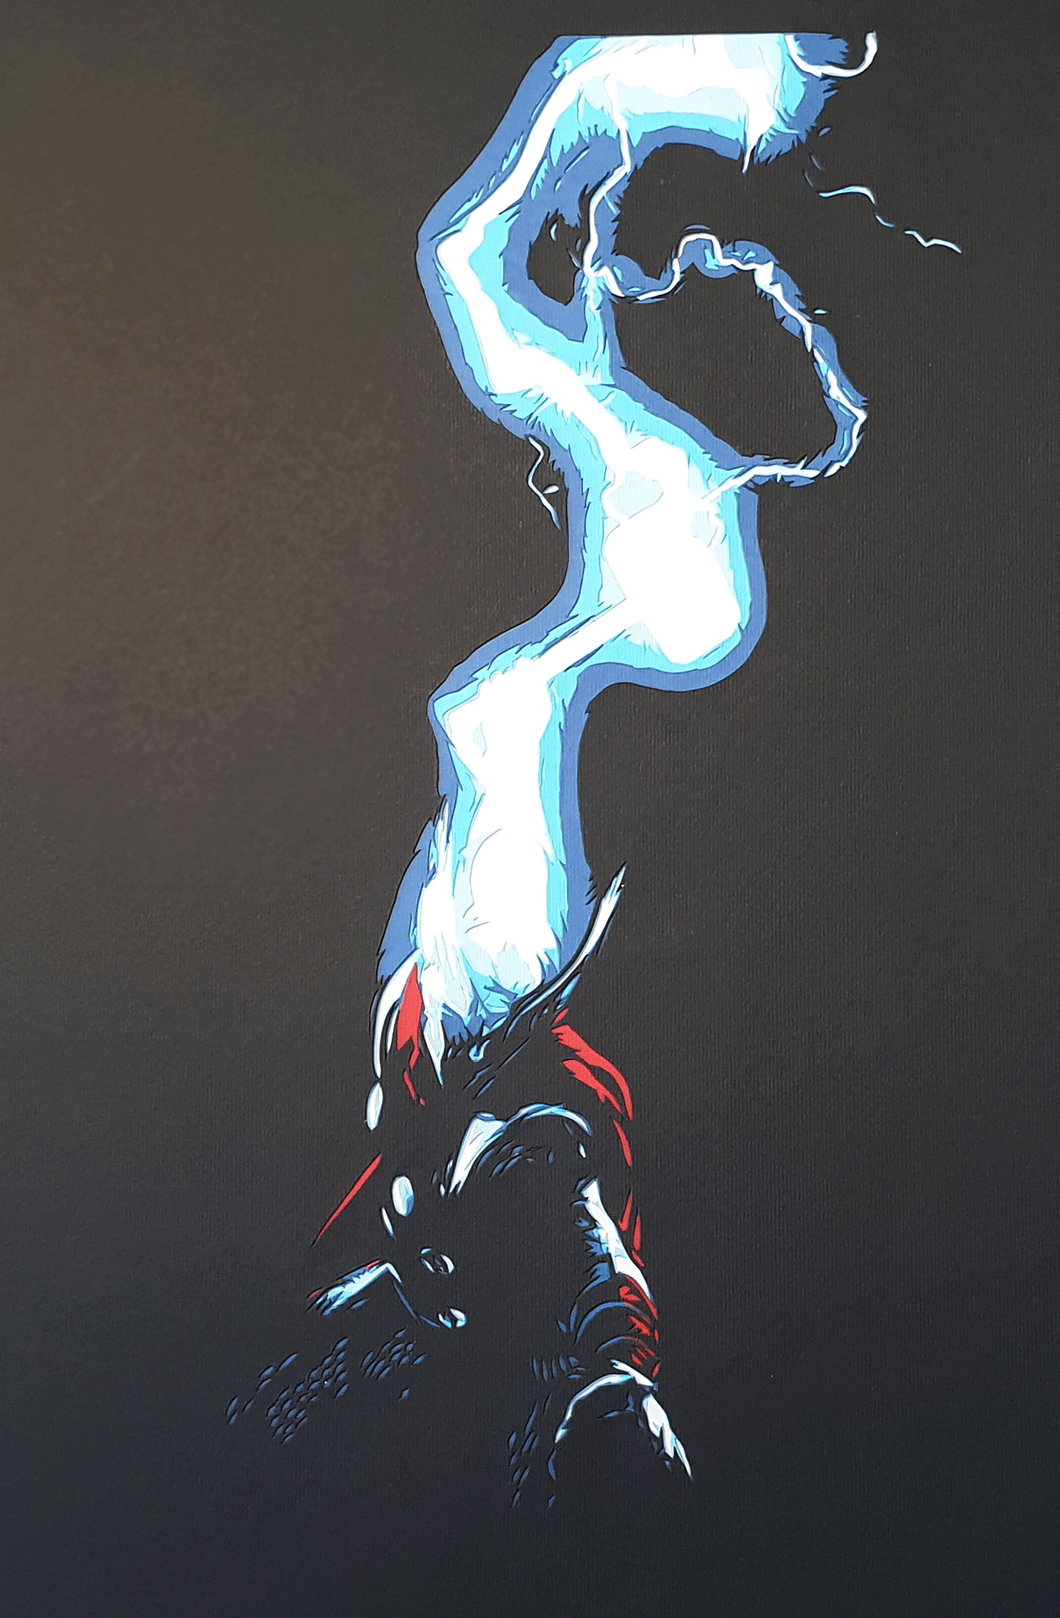 Thor - God Of Thunder by Rick Sharif - FRAMED [A3 Size (297 x 420 mm) (11.7 x 16.5 in) in a FRAME]